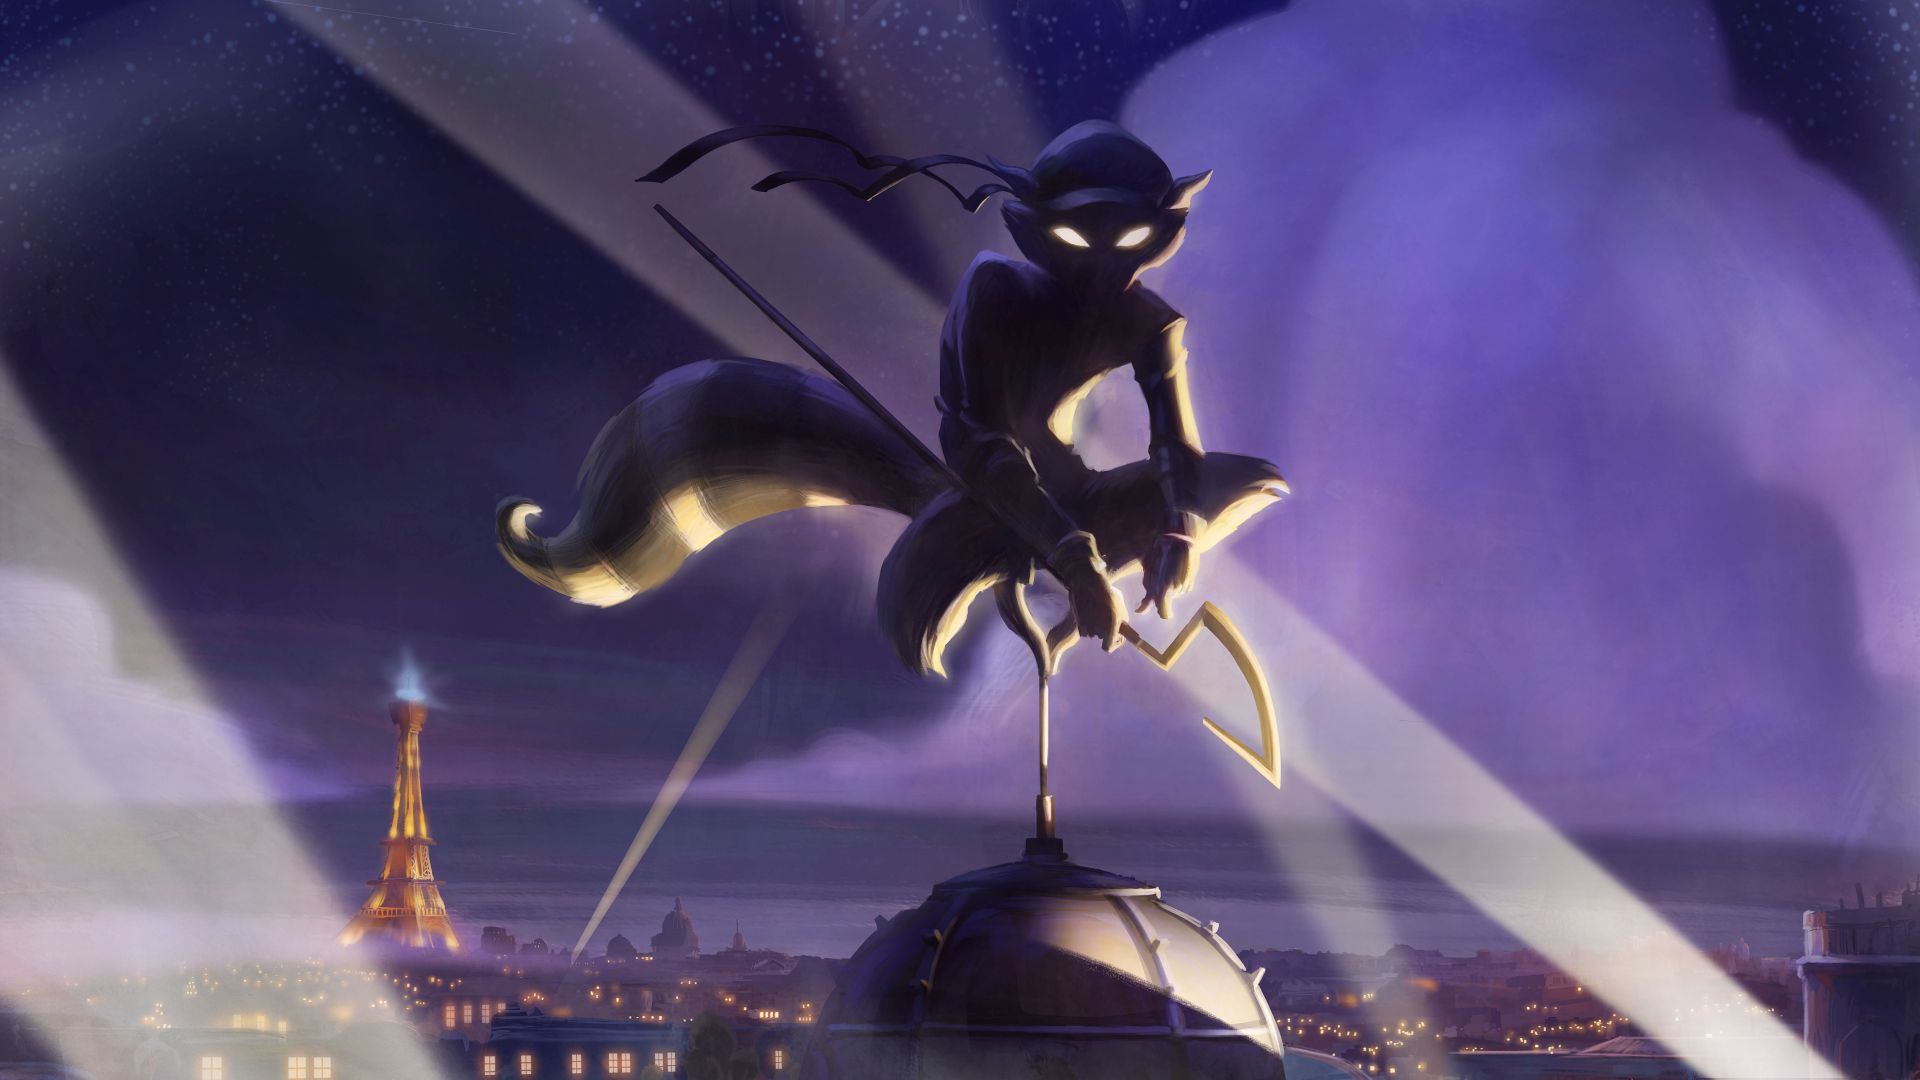 Sly Cooper 5 Might be Revealed During Sony's September Event, New